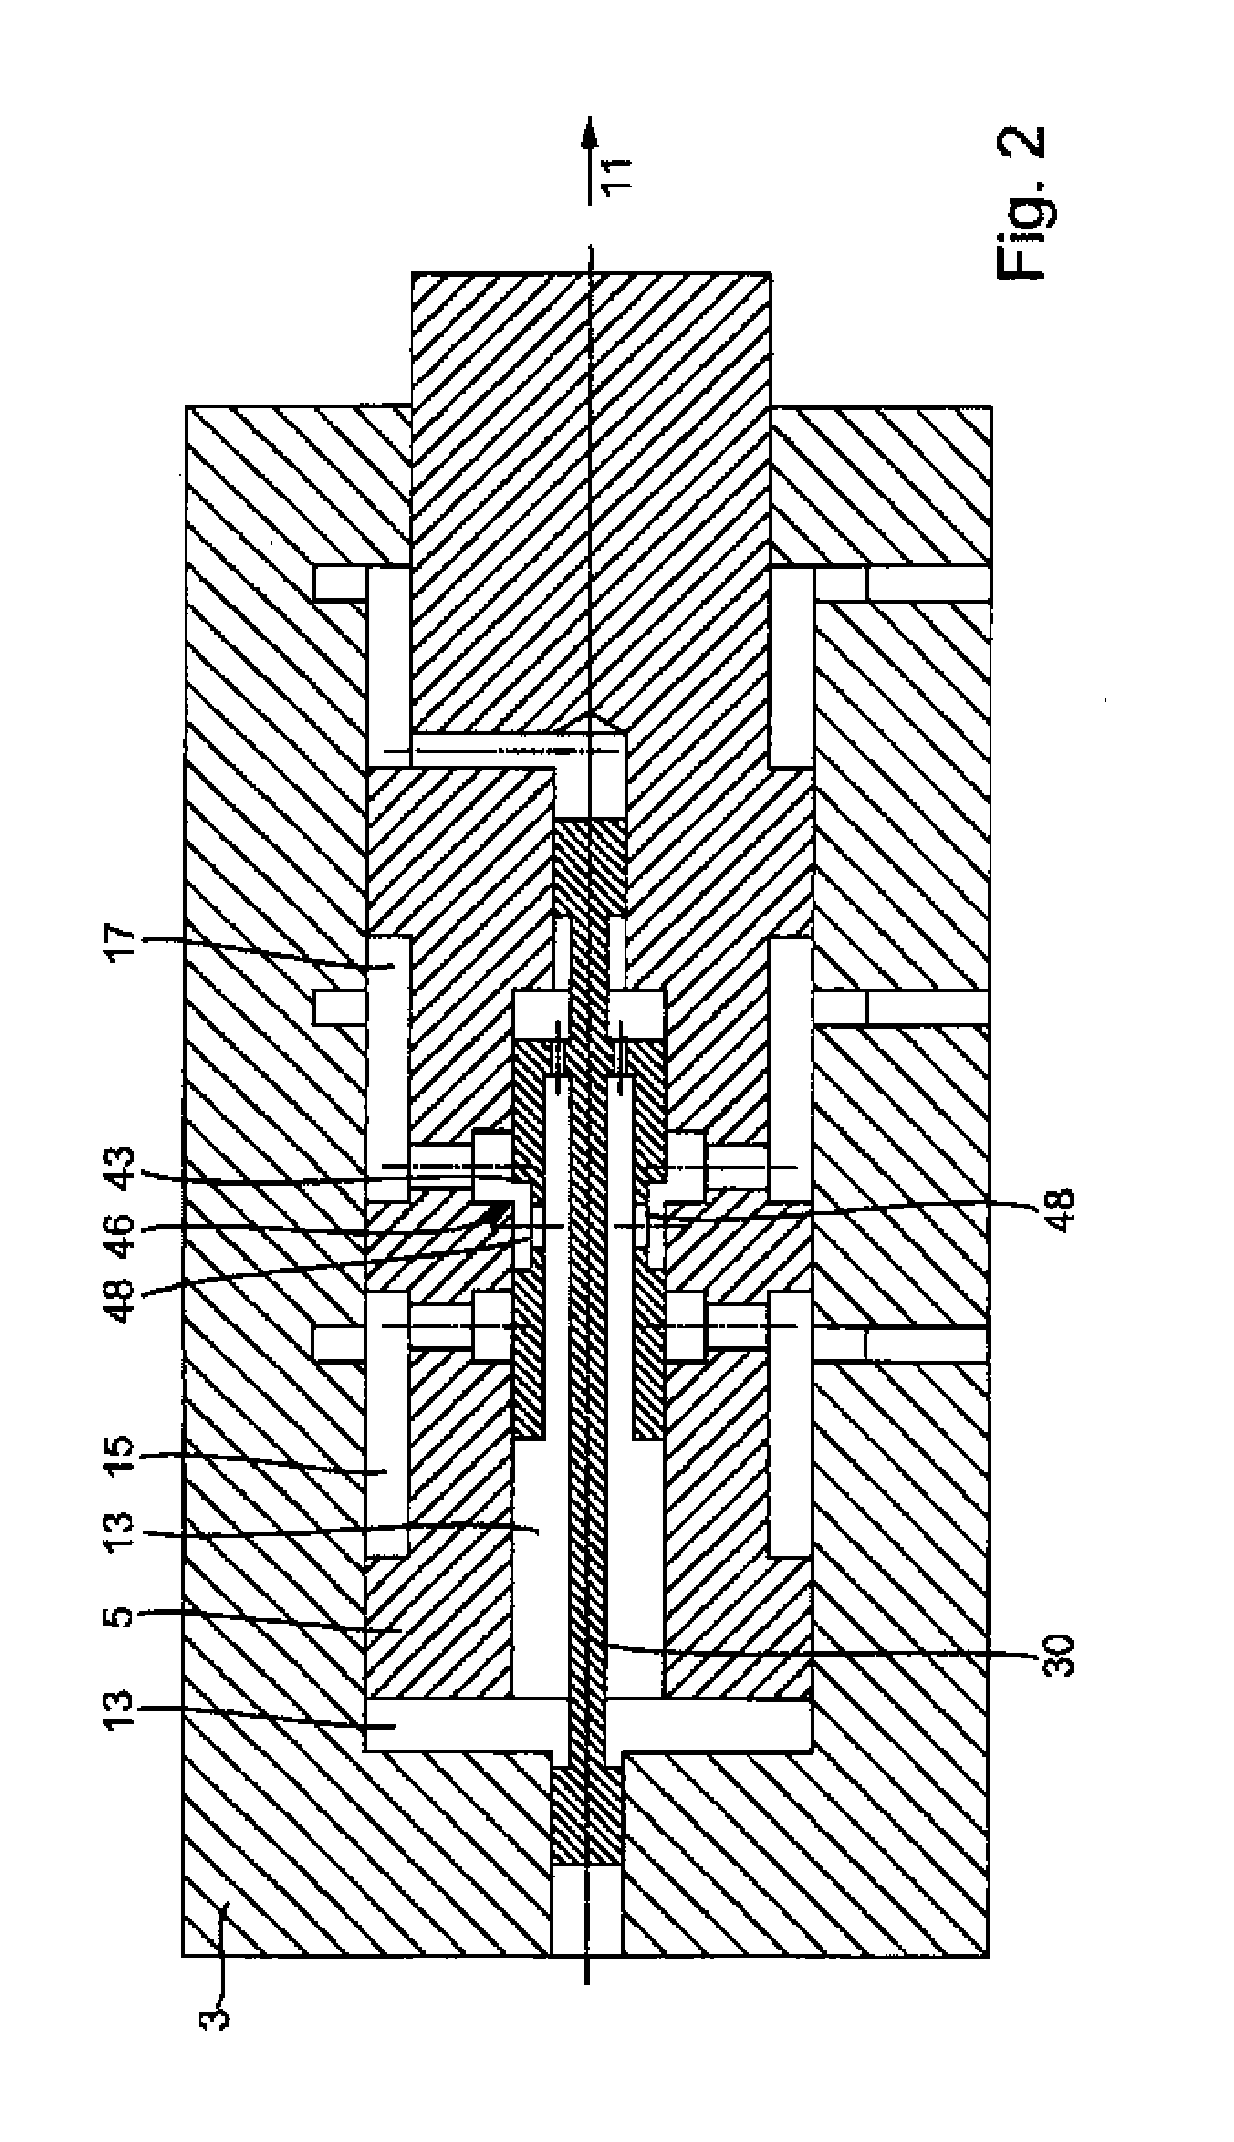 Hydraulic drive device having two pressure chambers and method for operating a hydraulic drive device having two pressure chambers